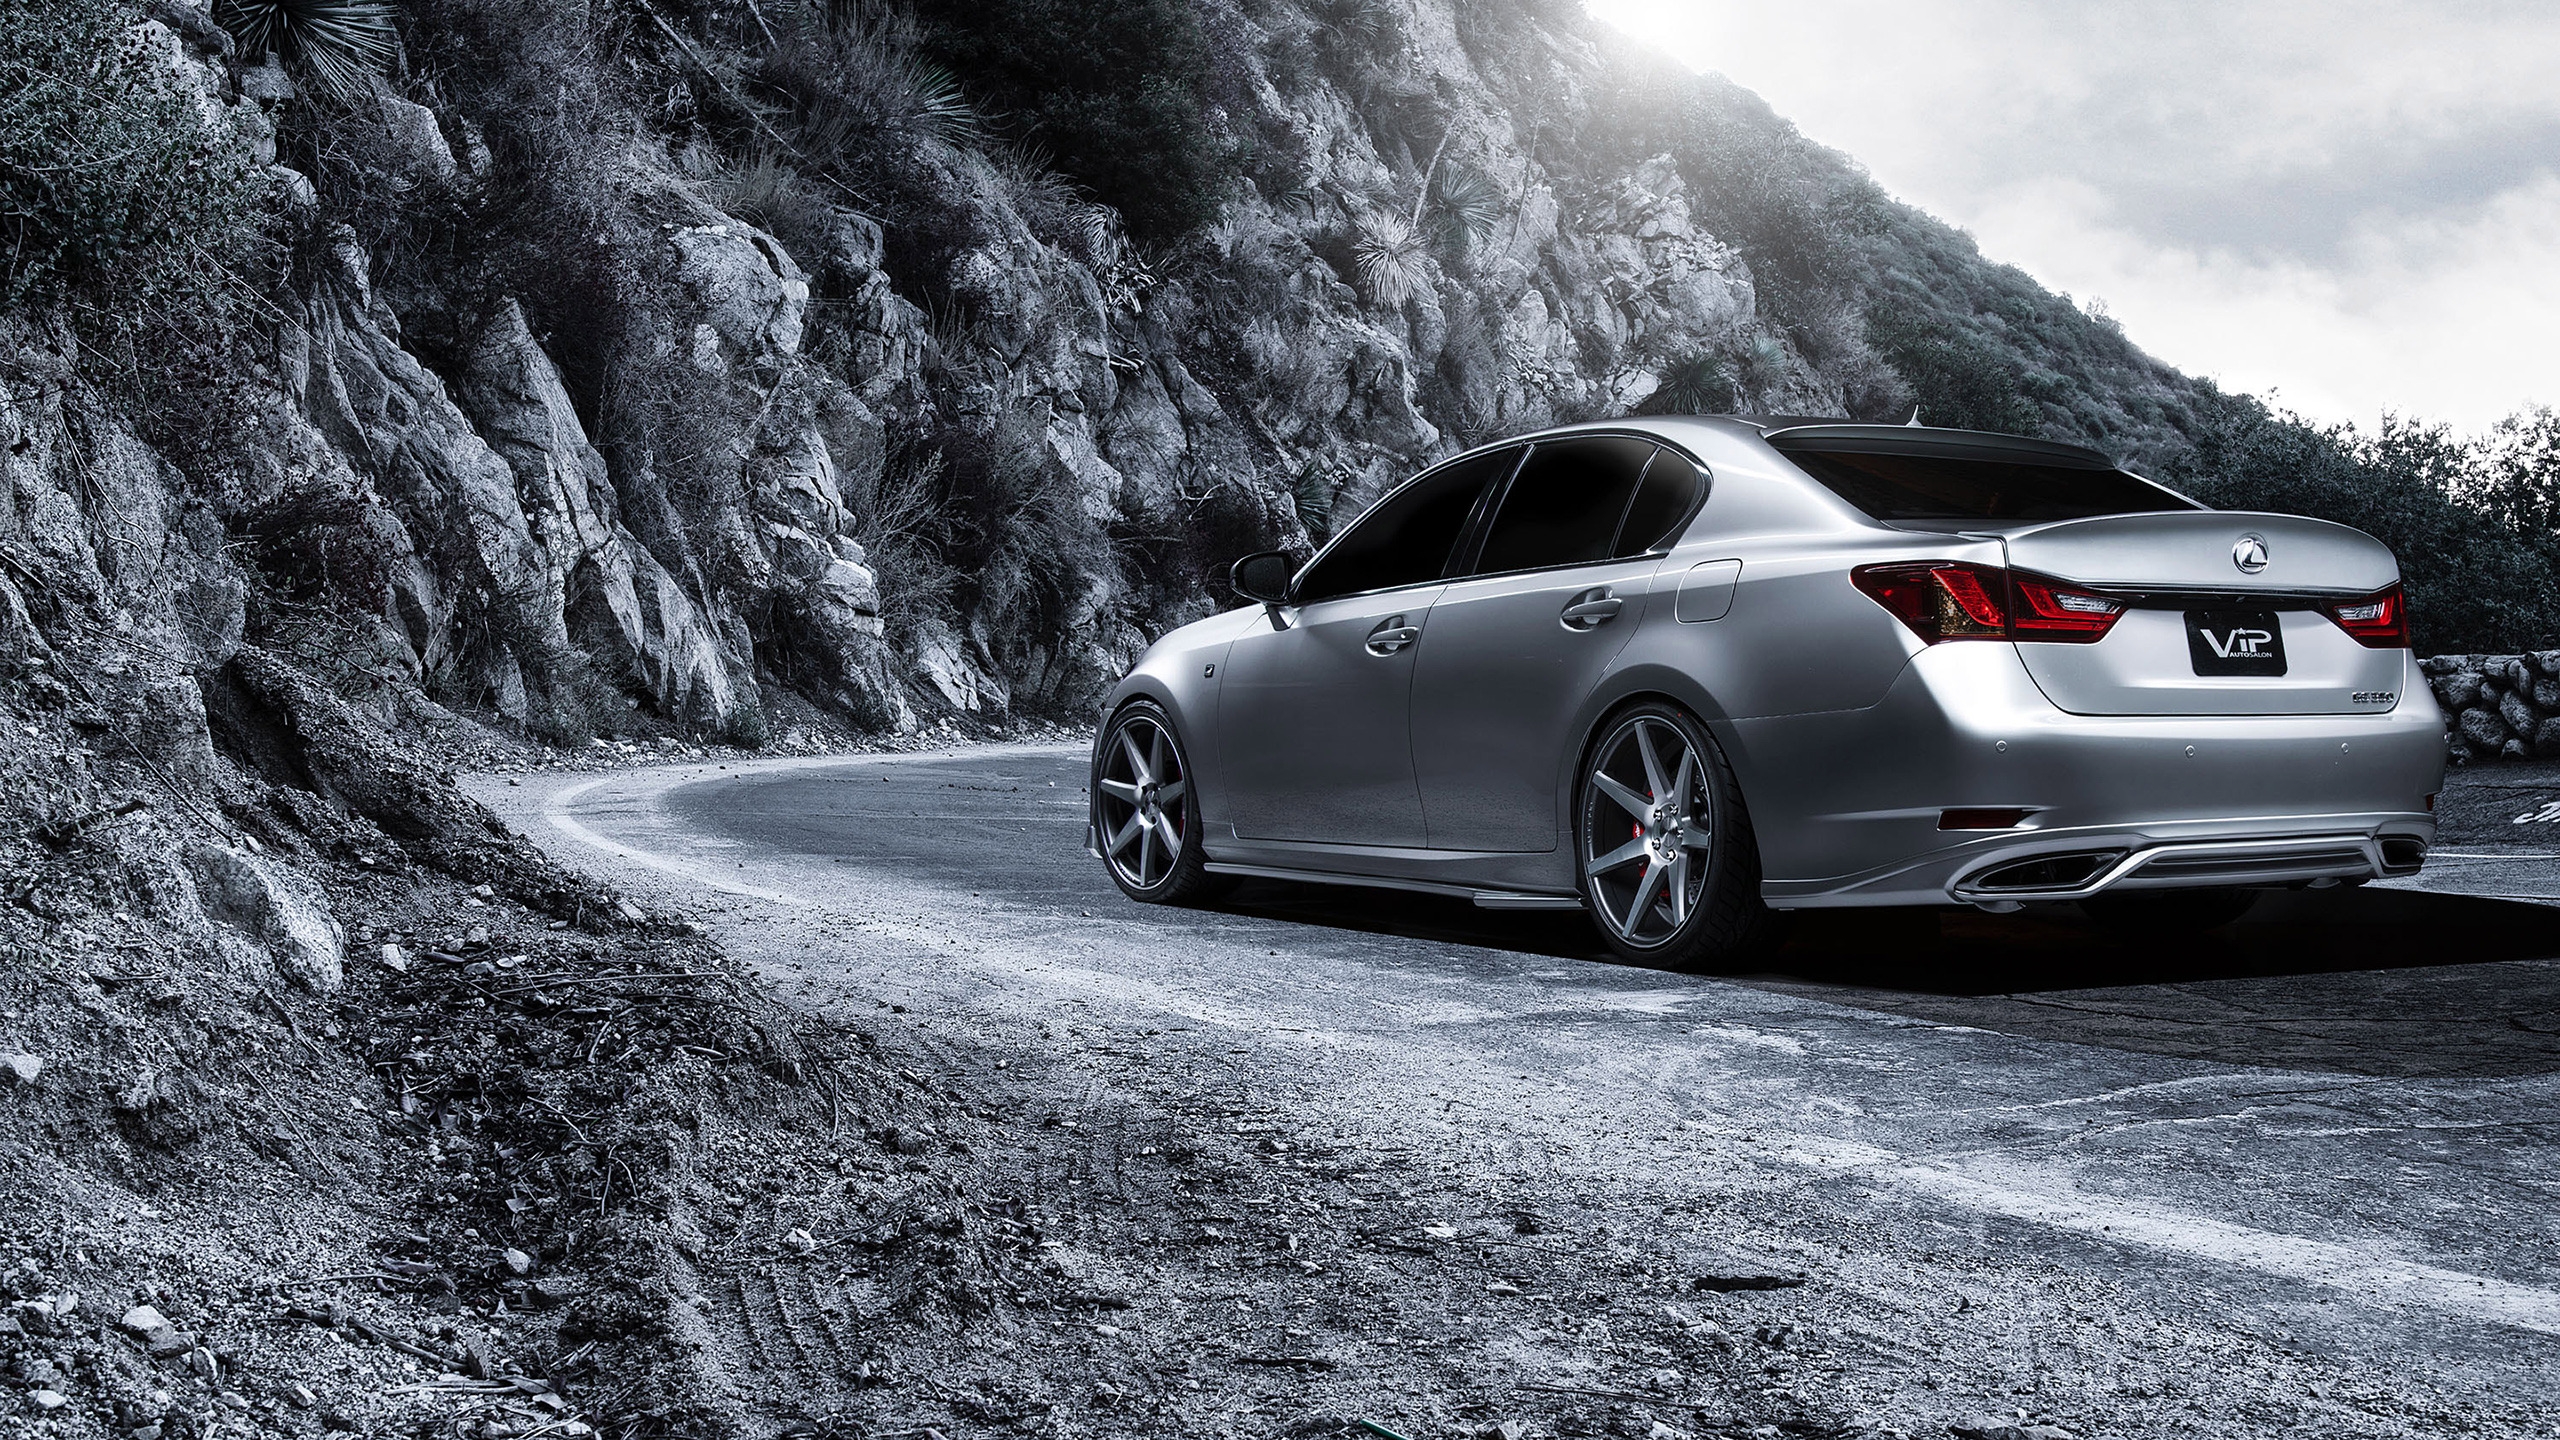 Lexus GS 350 Supercharged Rear for 2560x1440 HDTV resolution